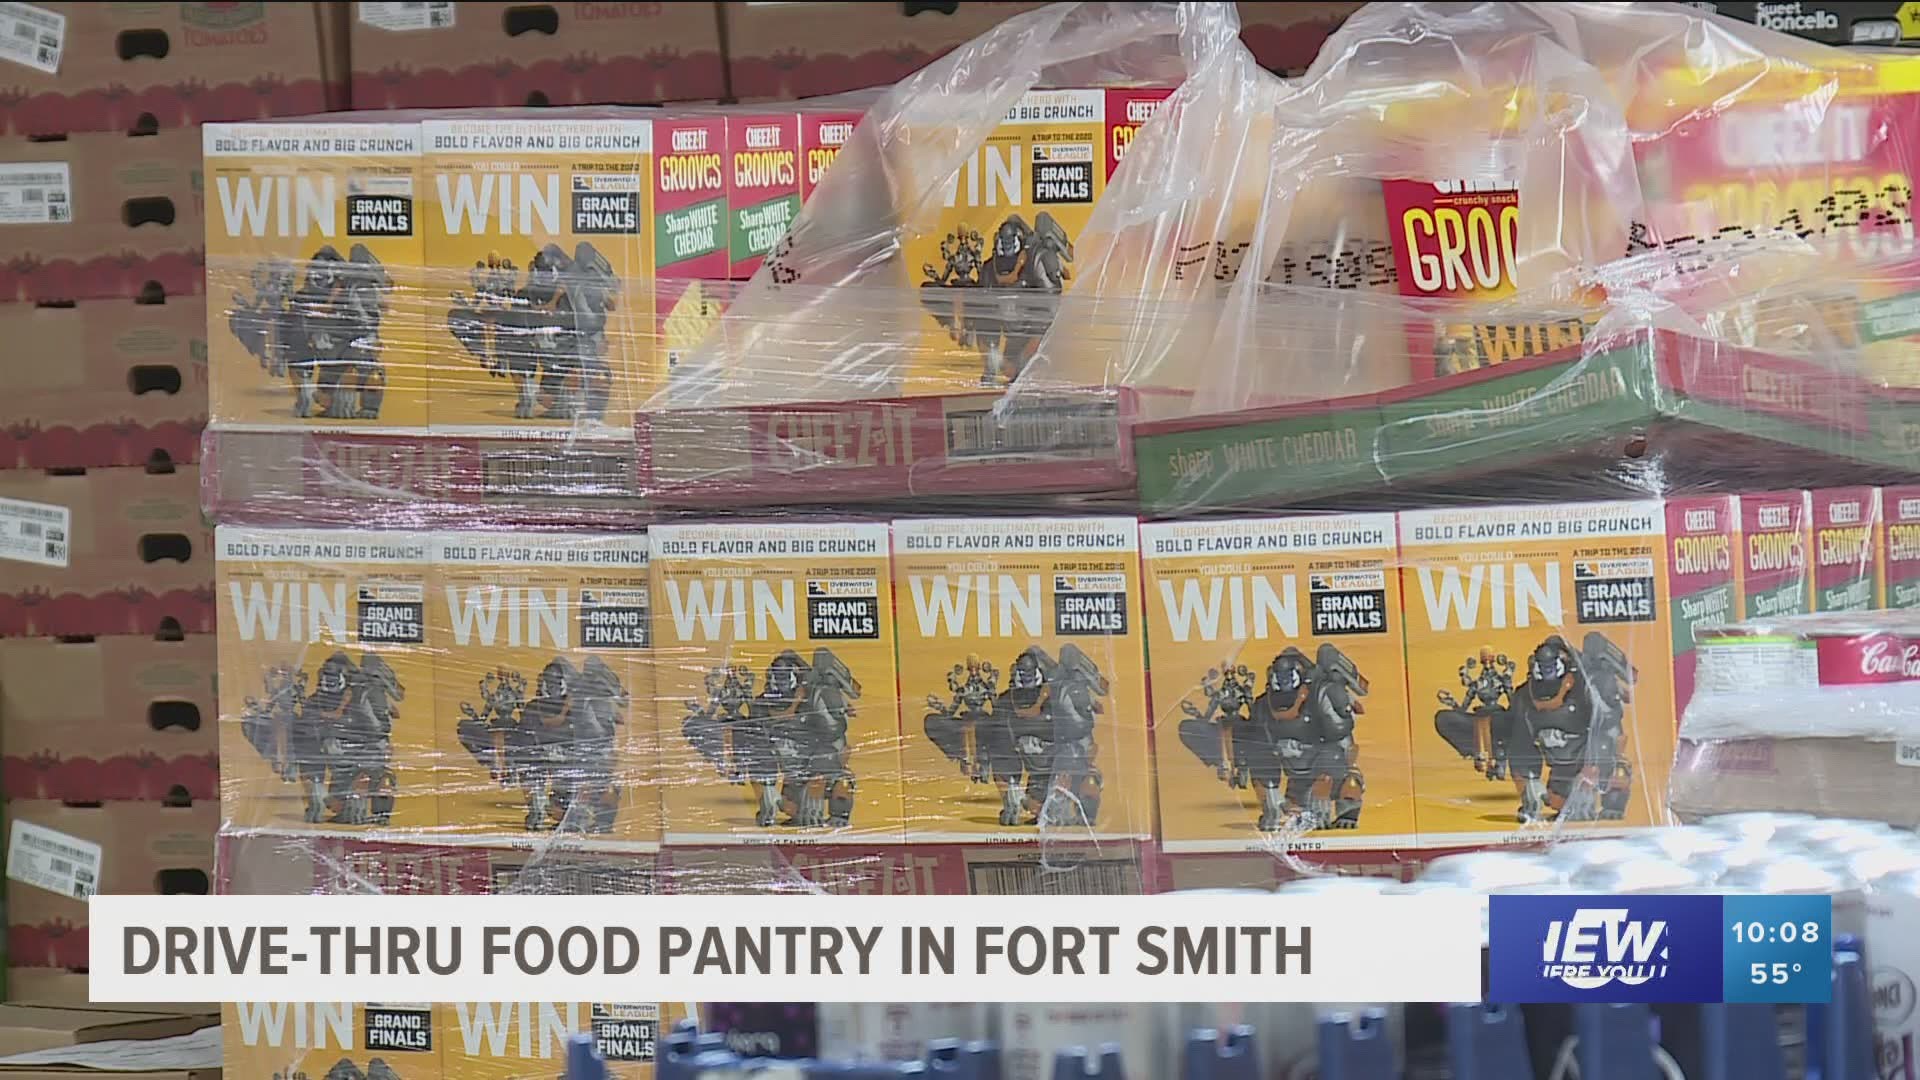 Drive-thru food pantry in Fort Smith